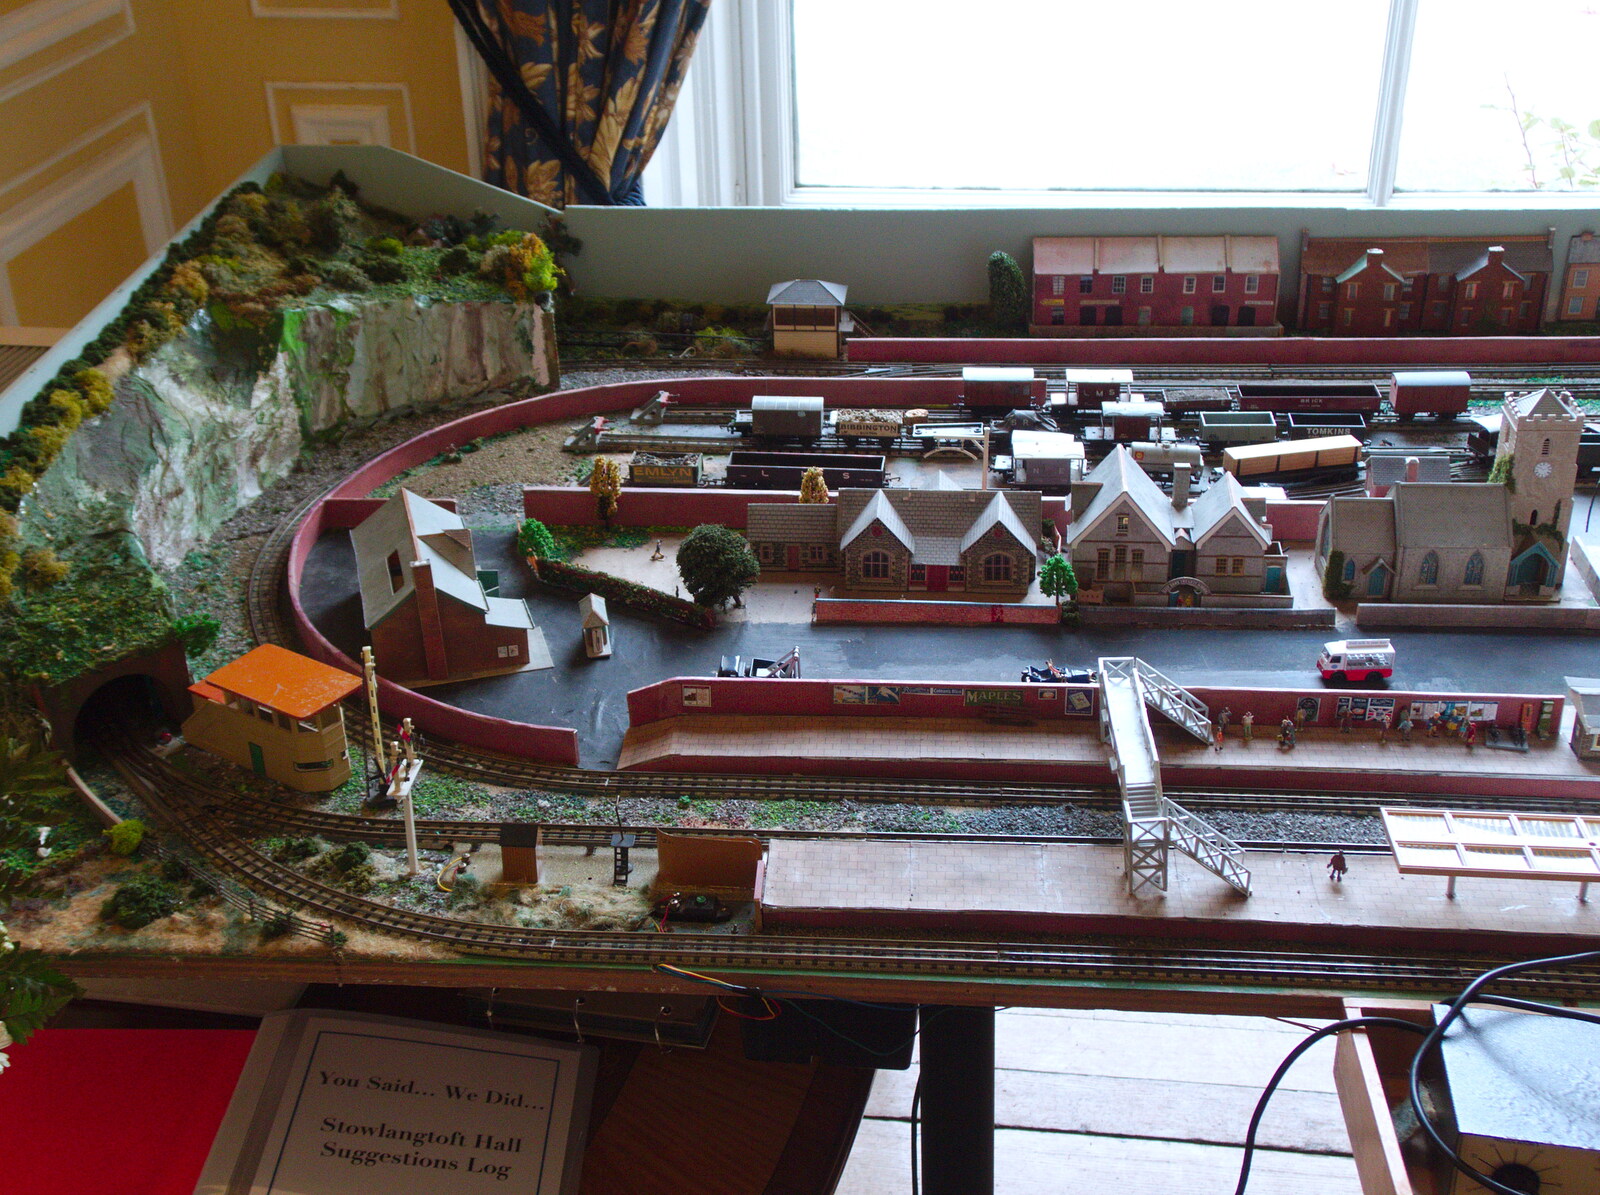 There's a cool model railway in the room from The GSB at Stowlangtoft, Beavers, and More XR Rebellions, Suffolk, Norfolk and London - 16th October 2019